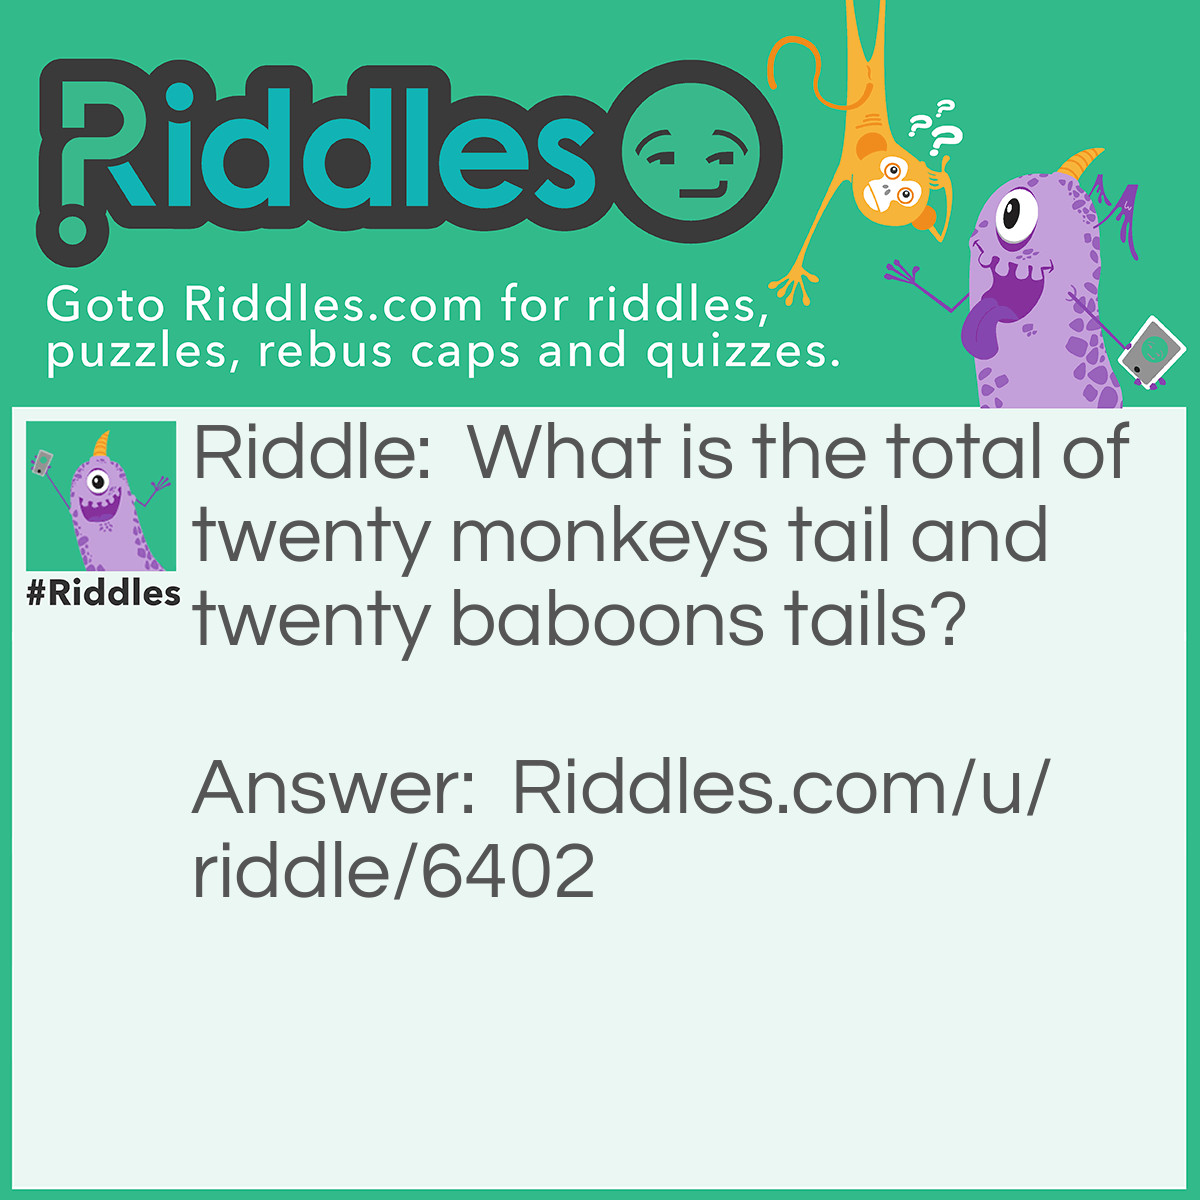 Riddle: What is the total of twenty monkeys tail and twenty baboons tails? Answer: Twenty... Baboons Don't Have Tail. Silly!!